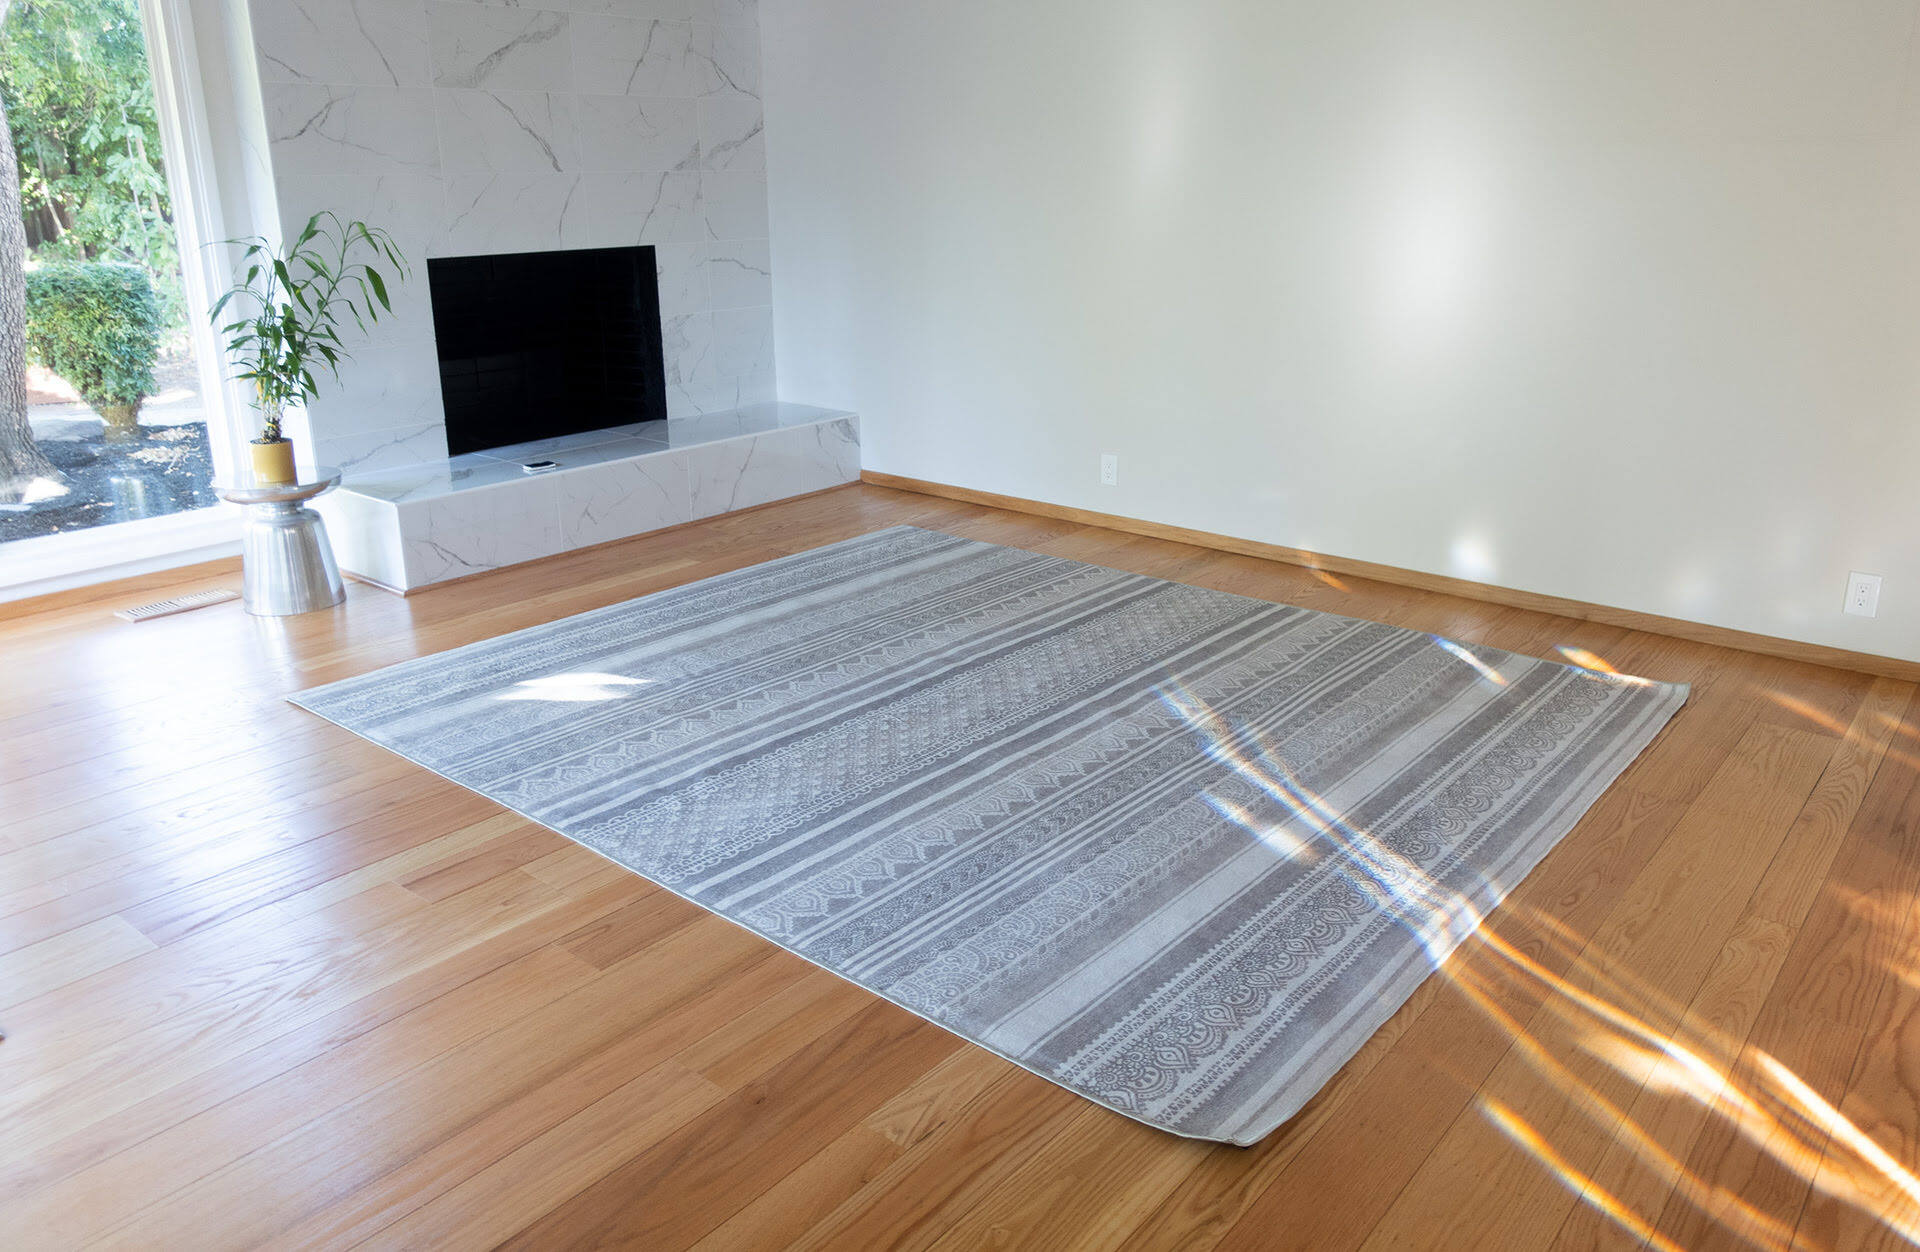 Ruggable review: This waterproof, washable rug is worth its price - Reviewed